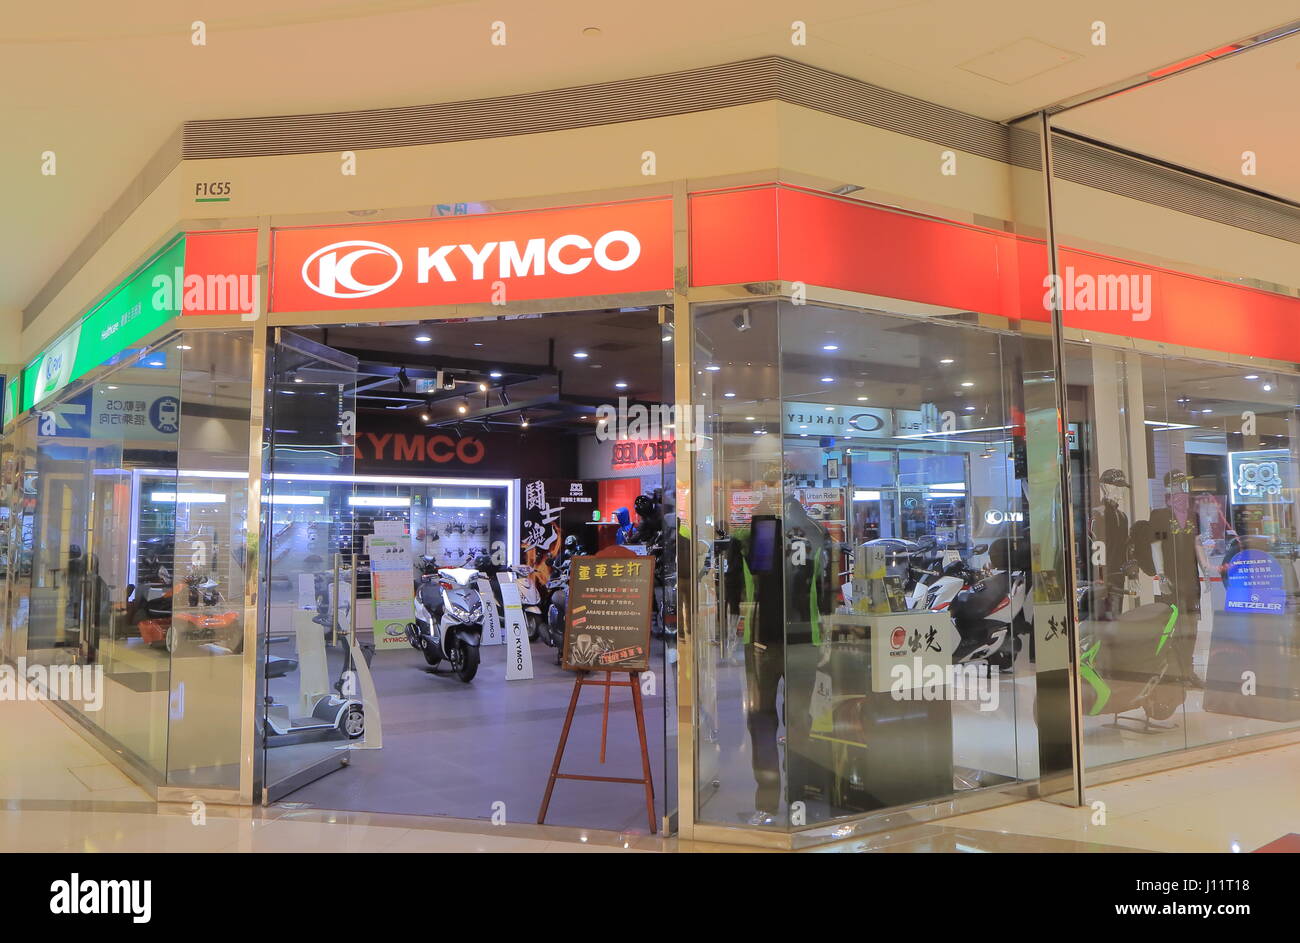 Kymco. Kymco is a Taiwanese company that manufactures motor scooters, motorcycles founded in 1963. Stock Photo